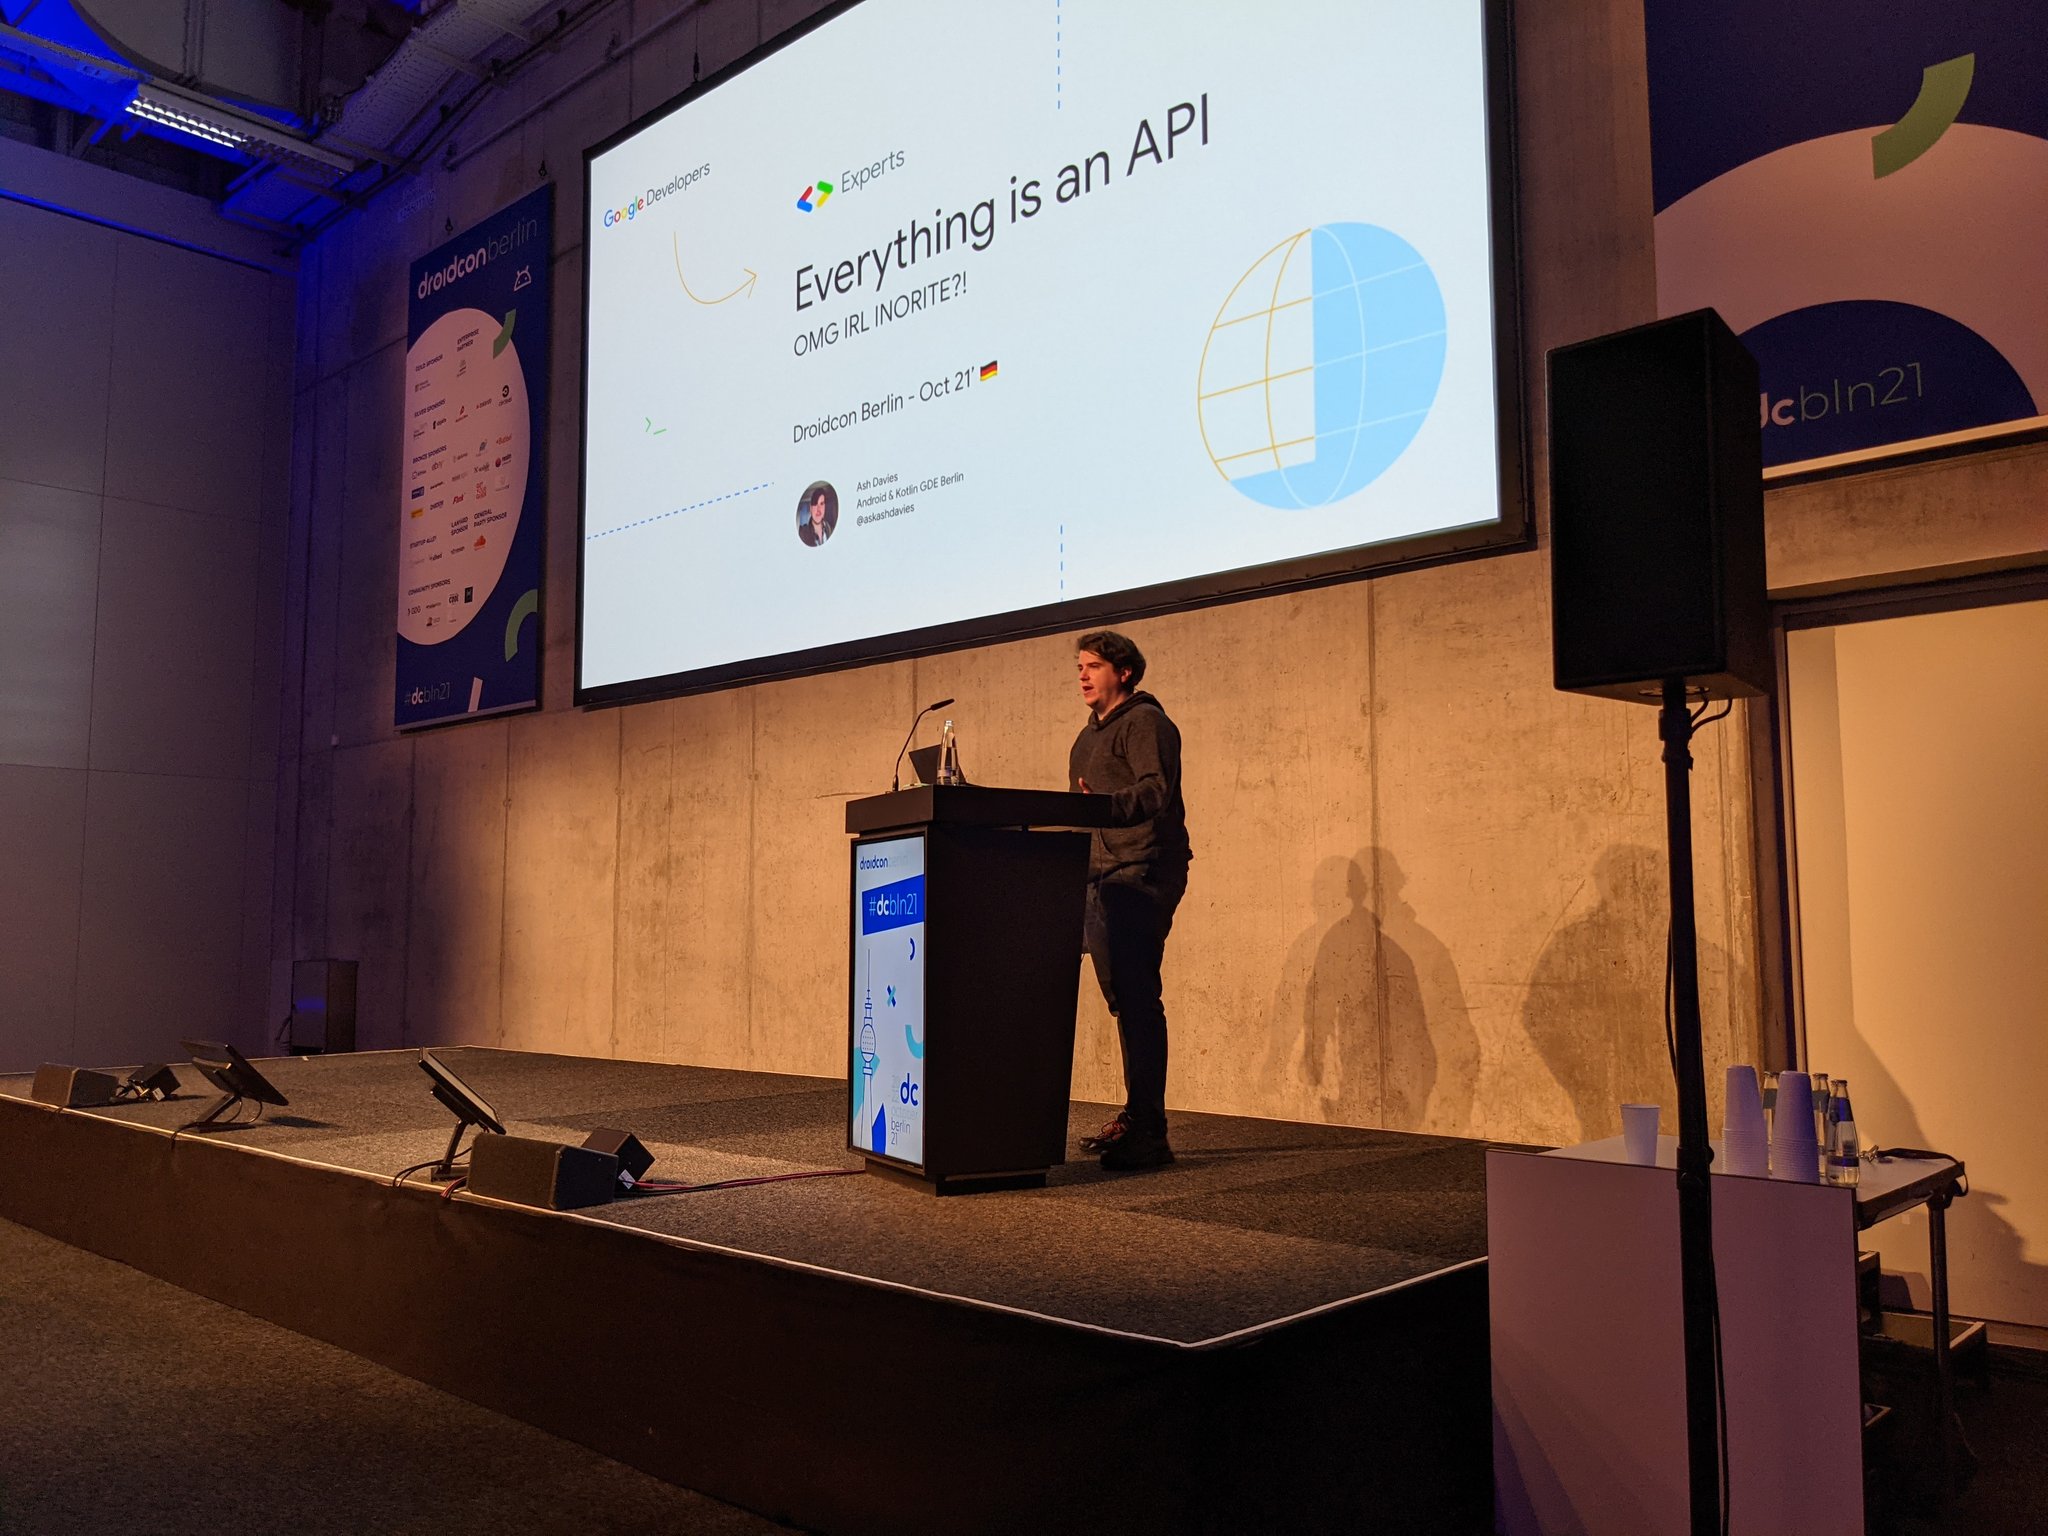 Droidcon Berlin: Everything is an API